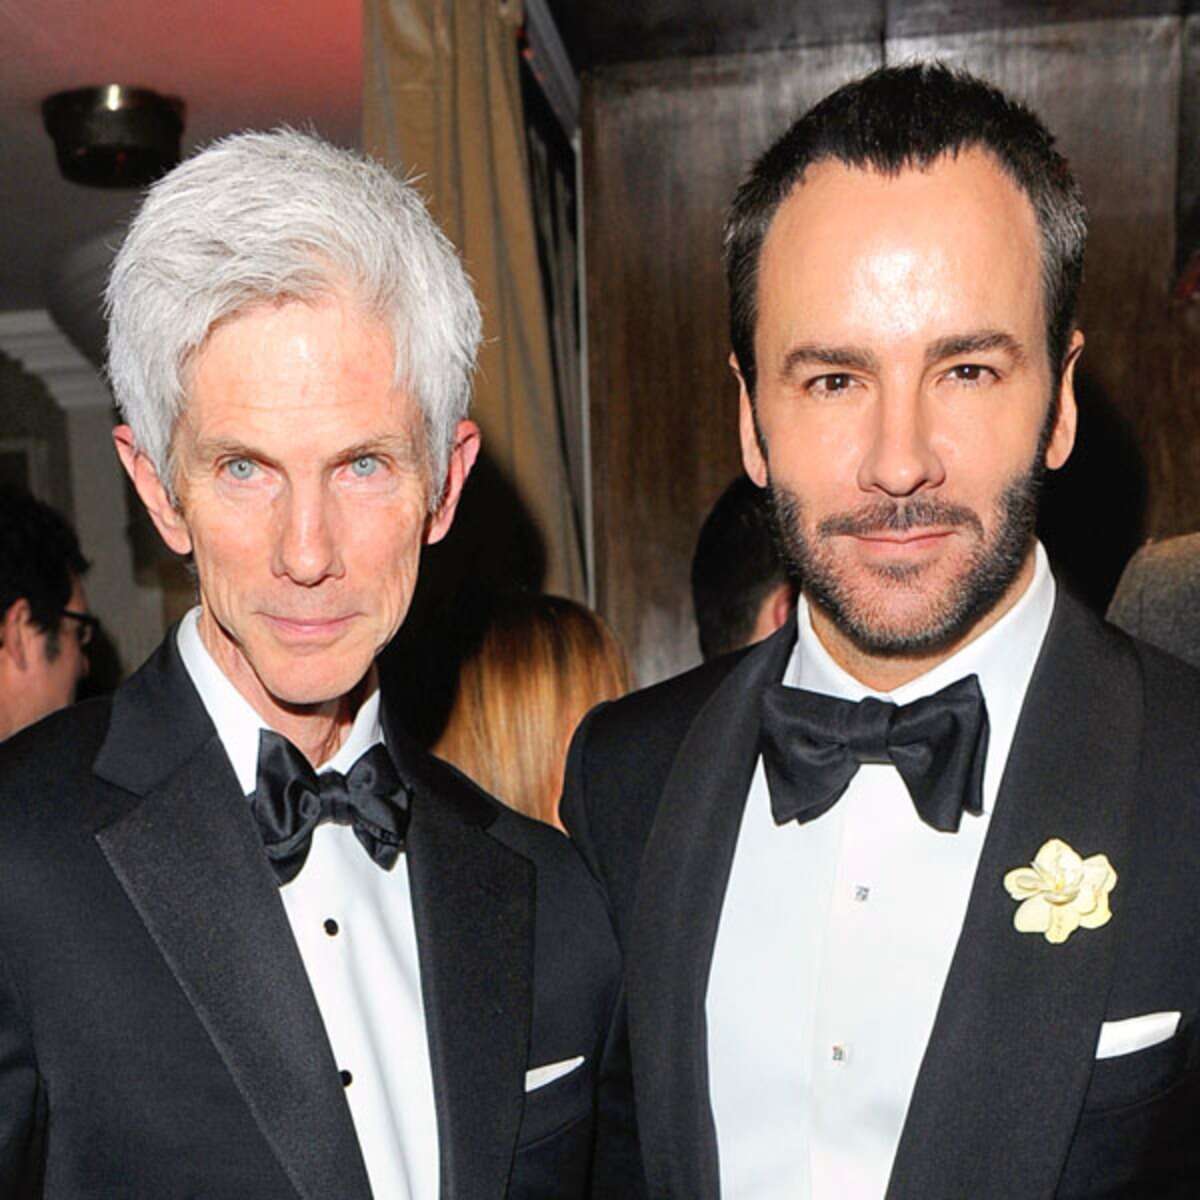 Richard Buckley, fashion editor and husband of Tom Ford, dies at